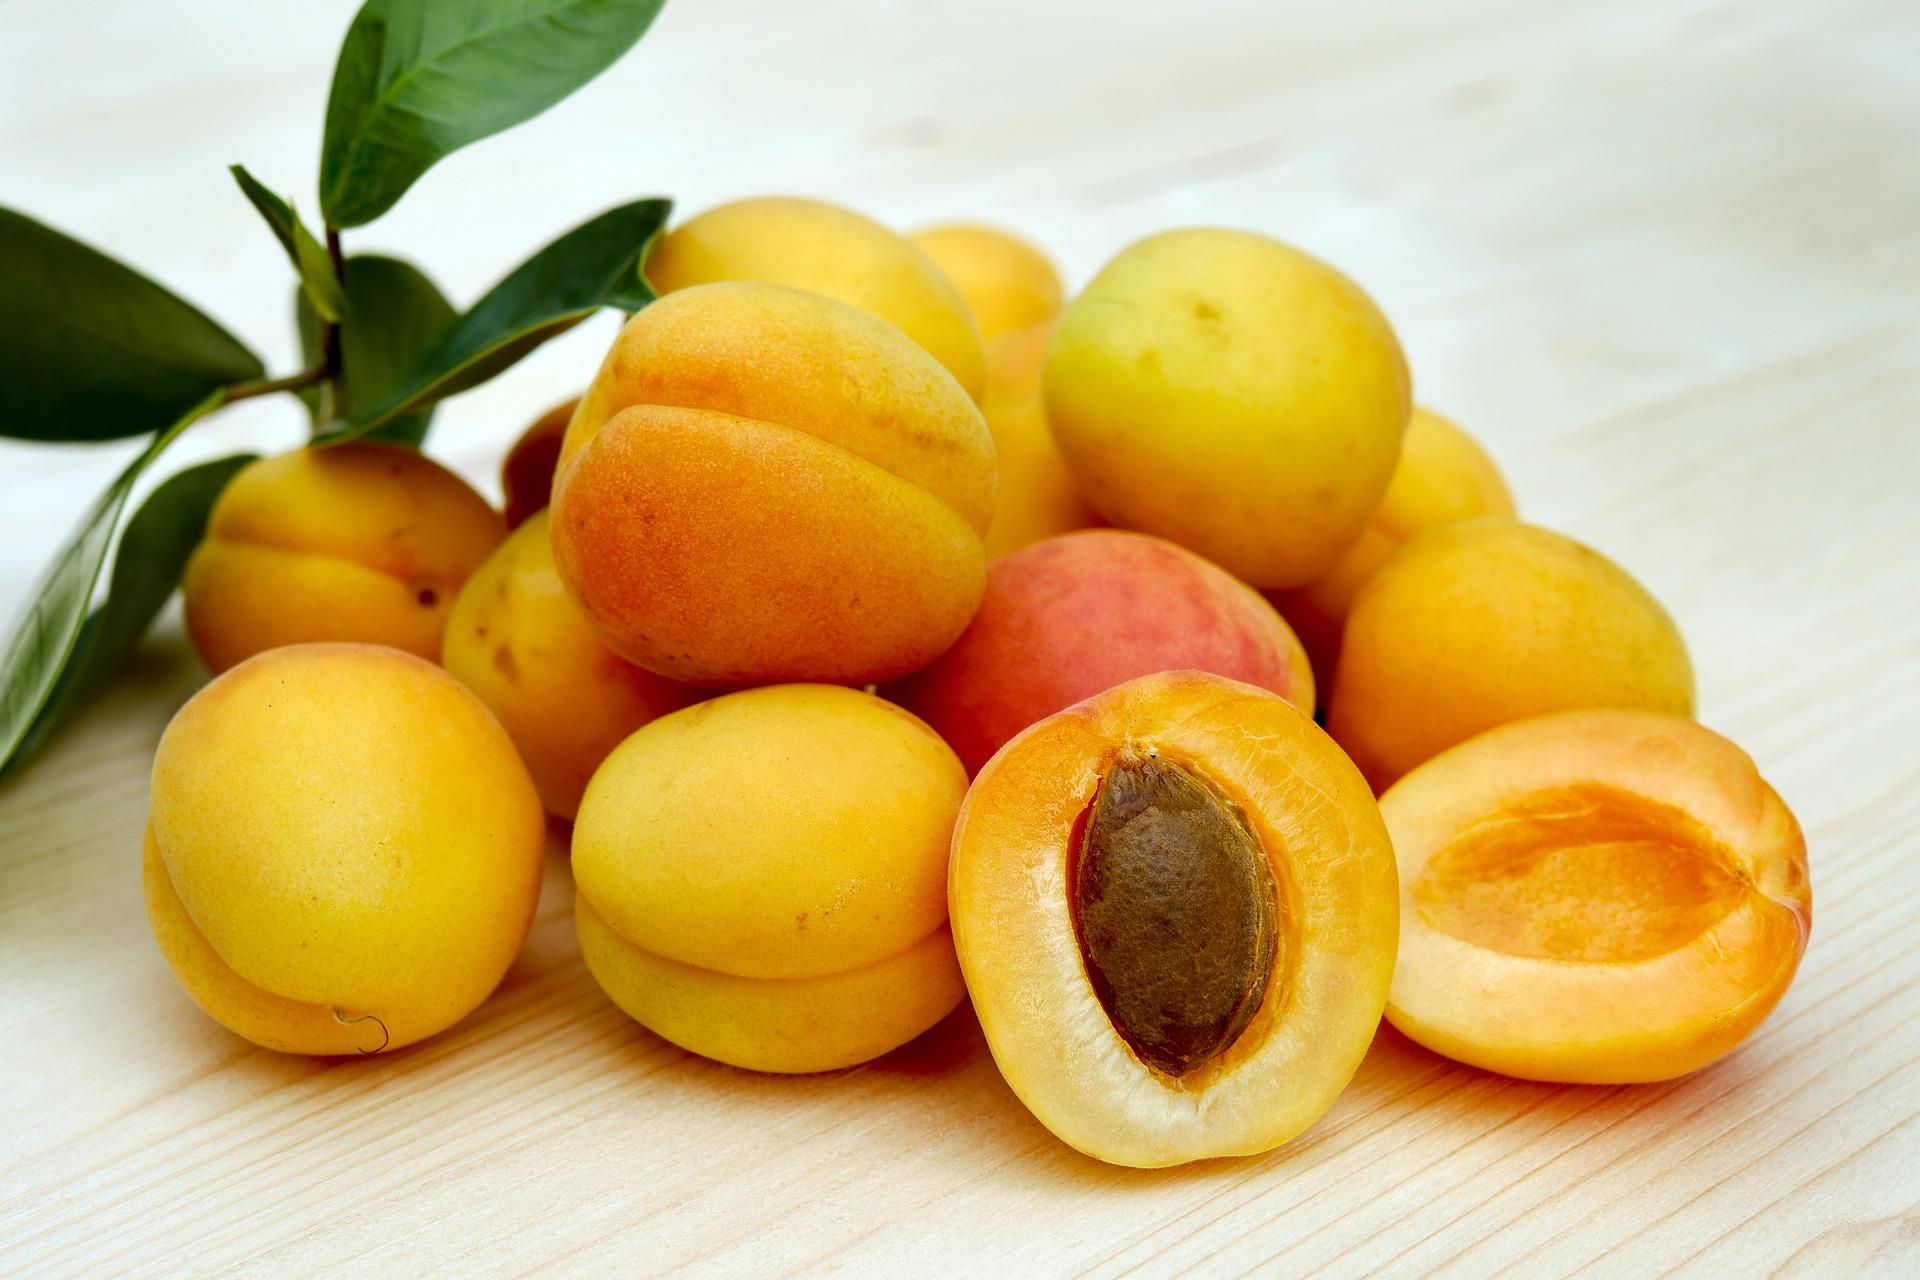 Dreaming About an Apricot Meaning